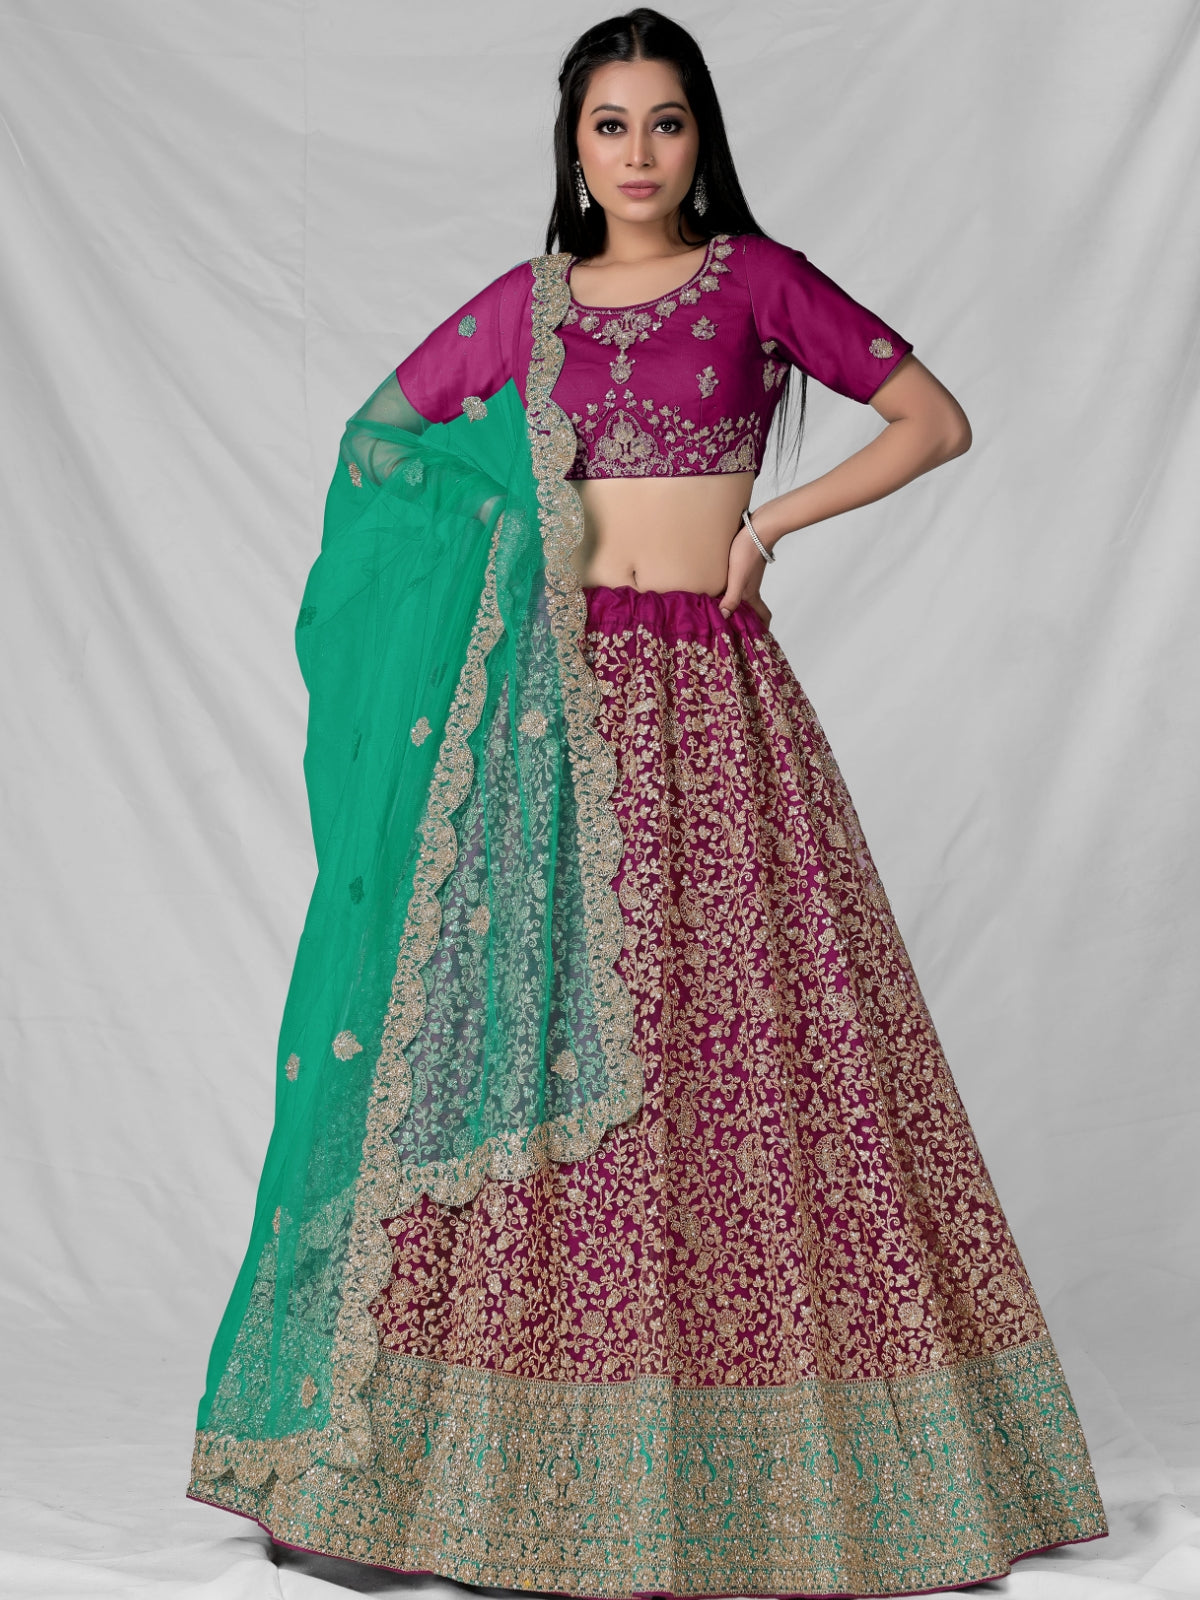 Odette  Magenta Soft Net Semi Stitched  Lehenga With Unstitched Blouse For Women